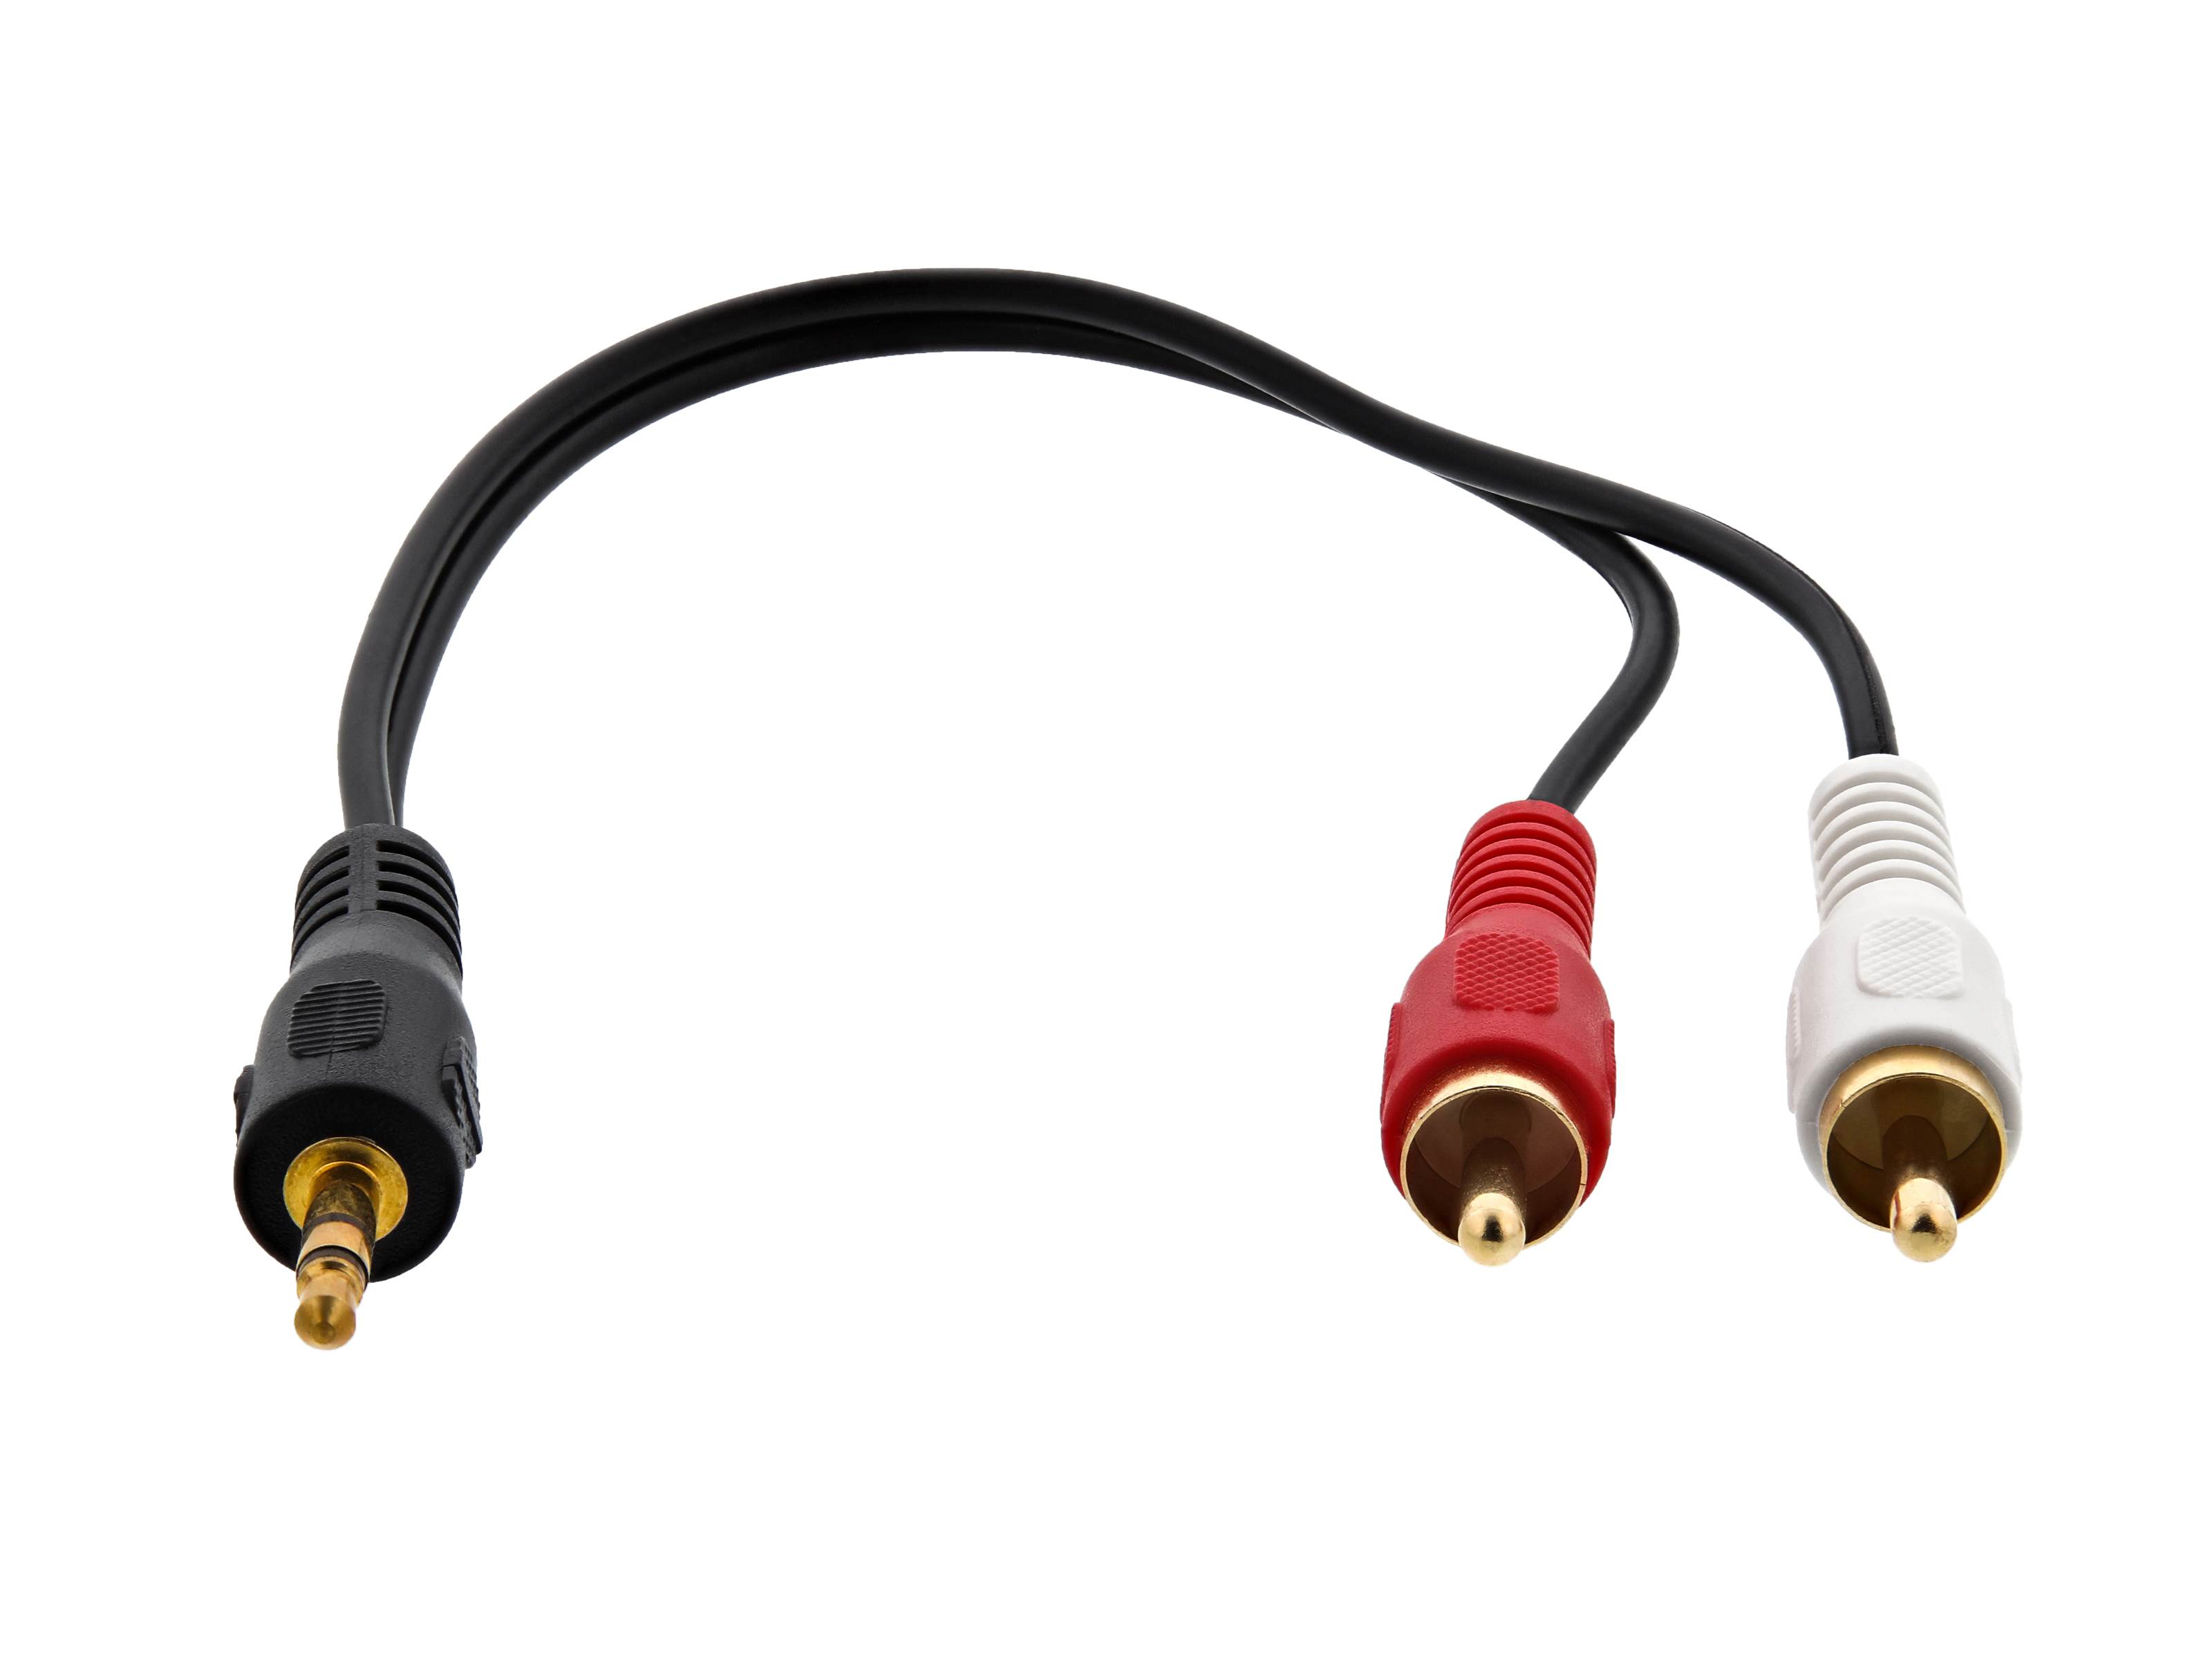 What Is Left And Right Audio Cable